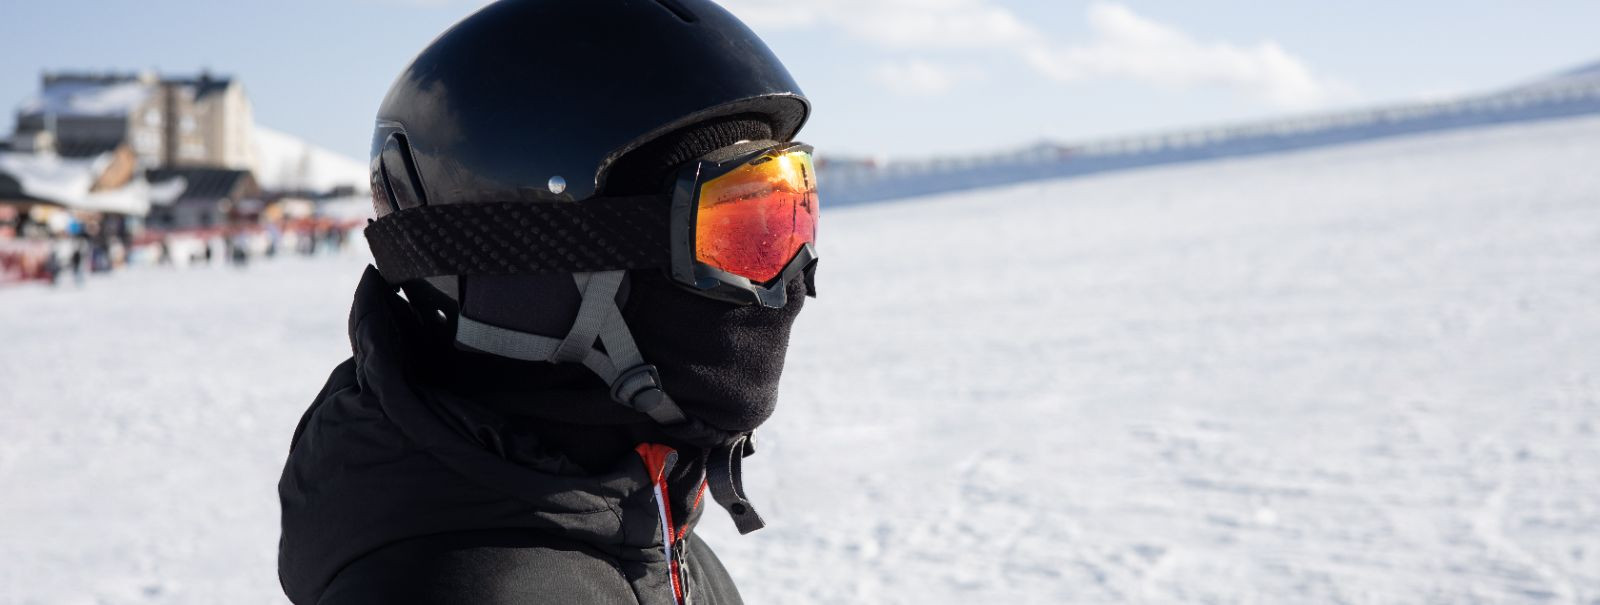 When it comes to hitting the slopes, safety should always be your top priority. A ski helmet is not just an accessory; it's a critical piece of safety equipment